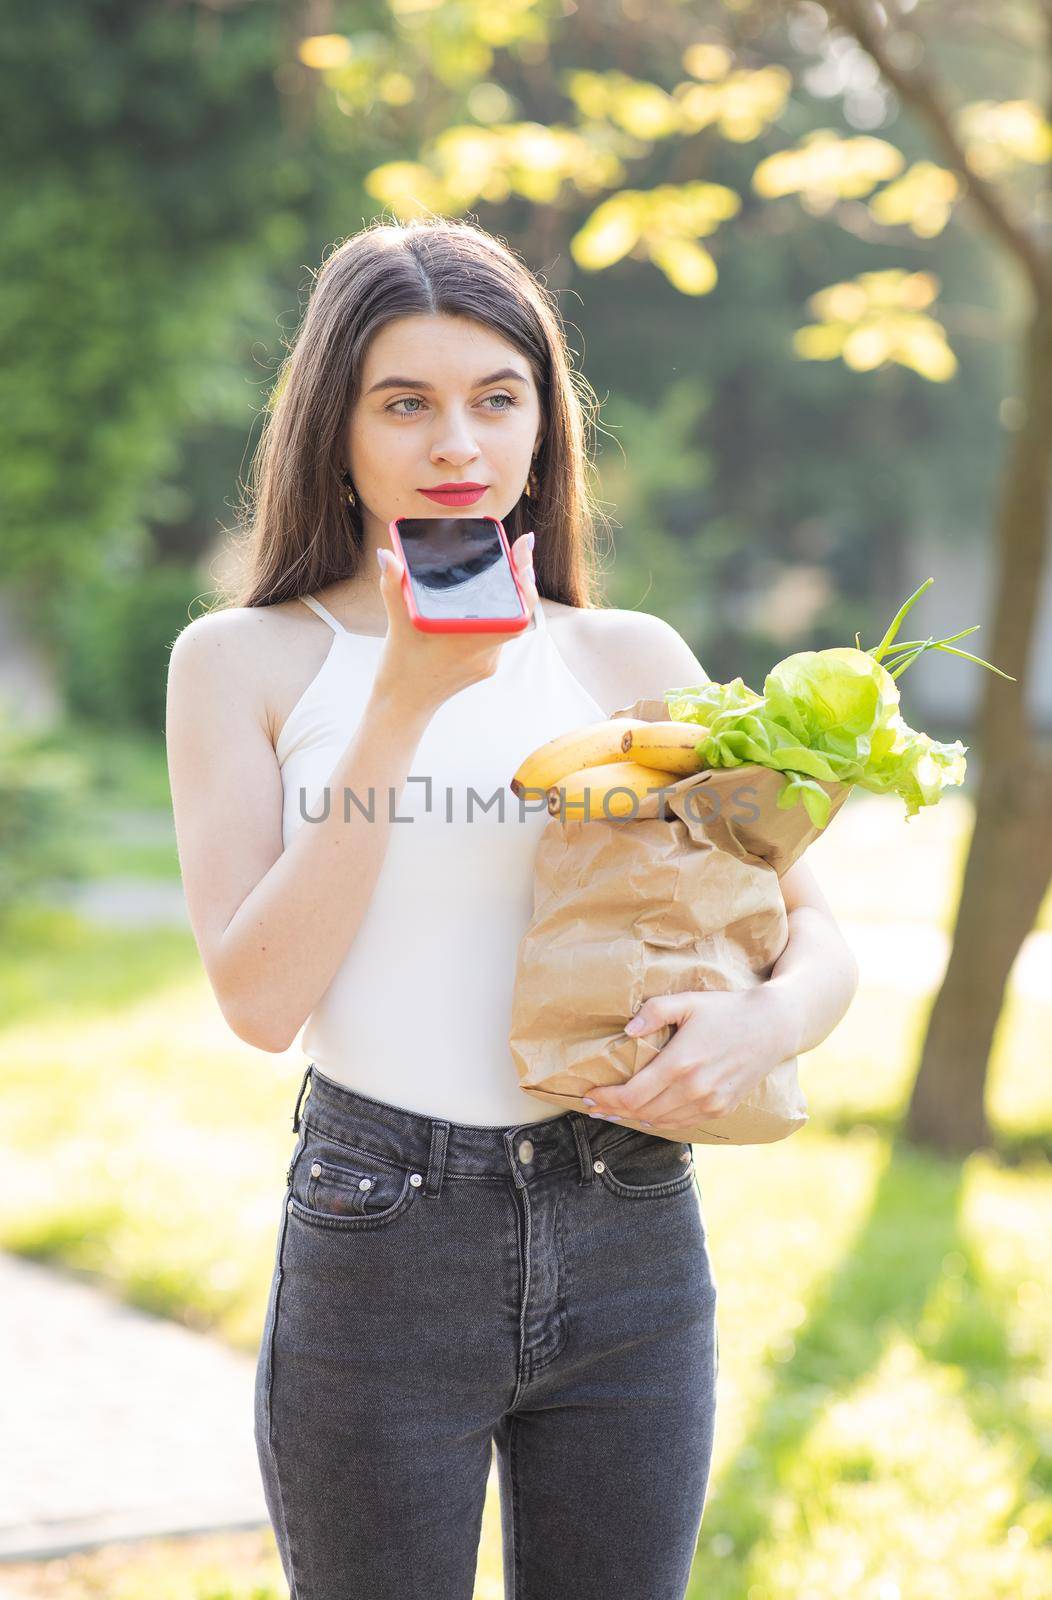 Happy girl using a smart phone voice recognition audio ai message speech function on line walking on a park background and carrying bag with food.